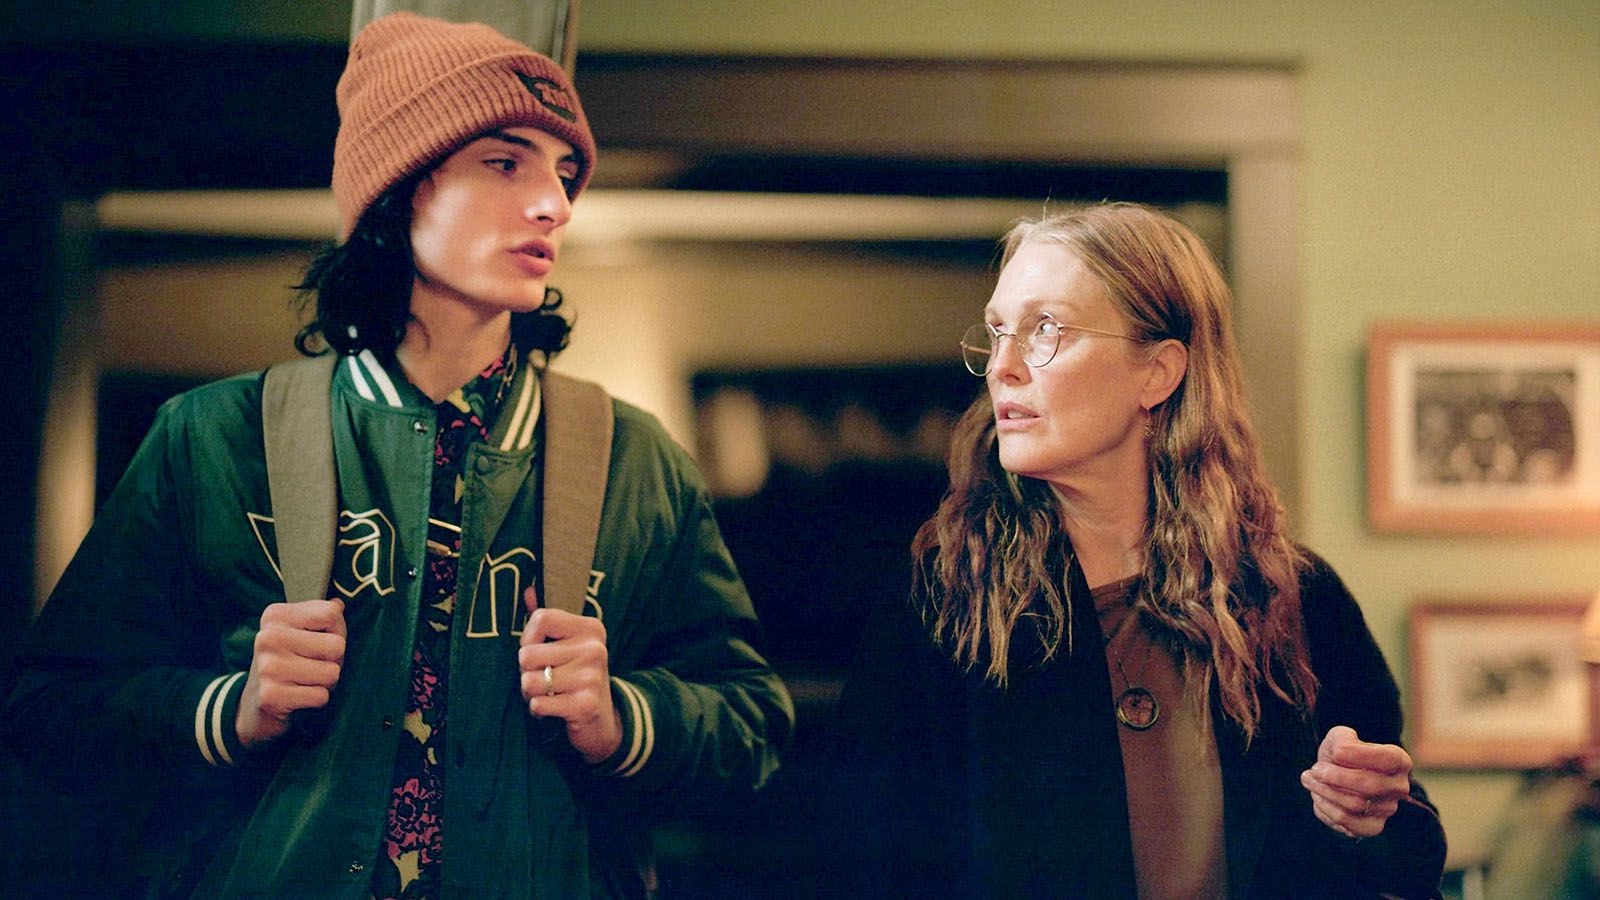 Finn Wolfhard and Julianne Moore star as son and mother in the new A24 film, When You Finish Saving the World, showing Jan. 21 at Cinema Center.